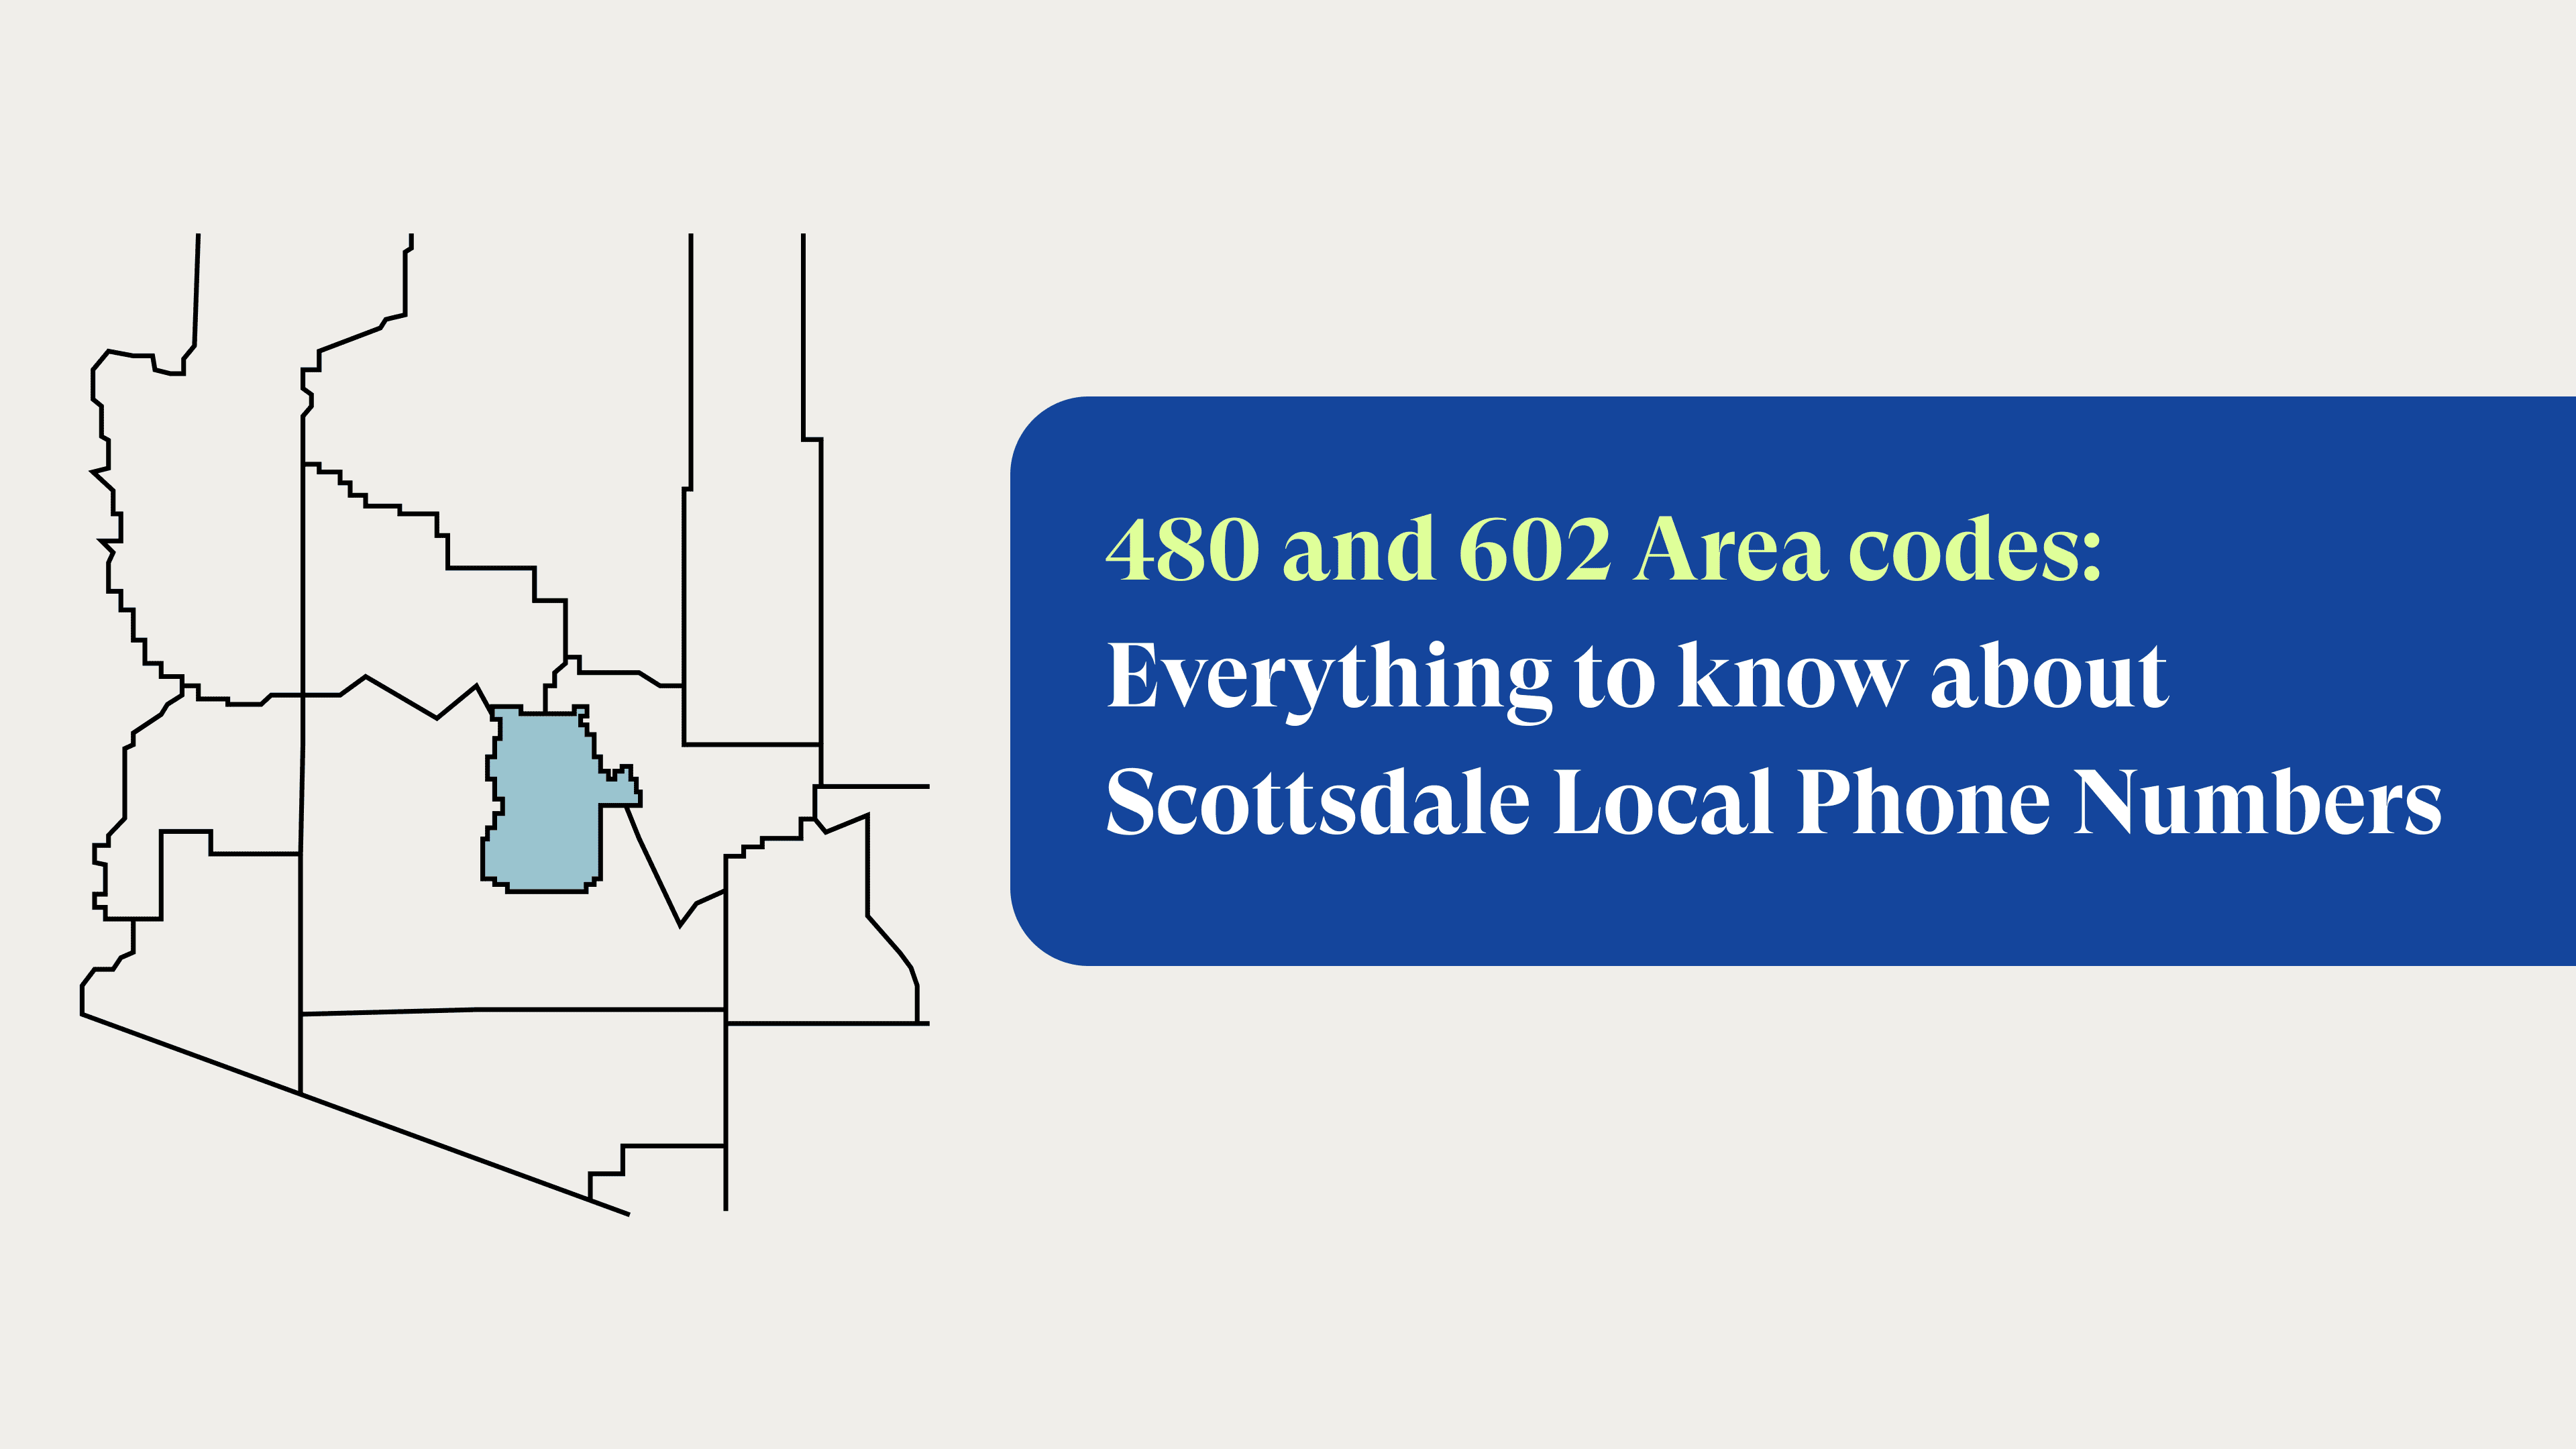 480 and 602 Area codes: Scottsdale Local Phone Numbers